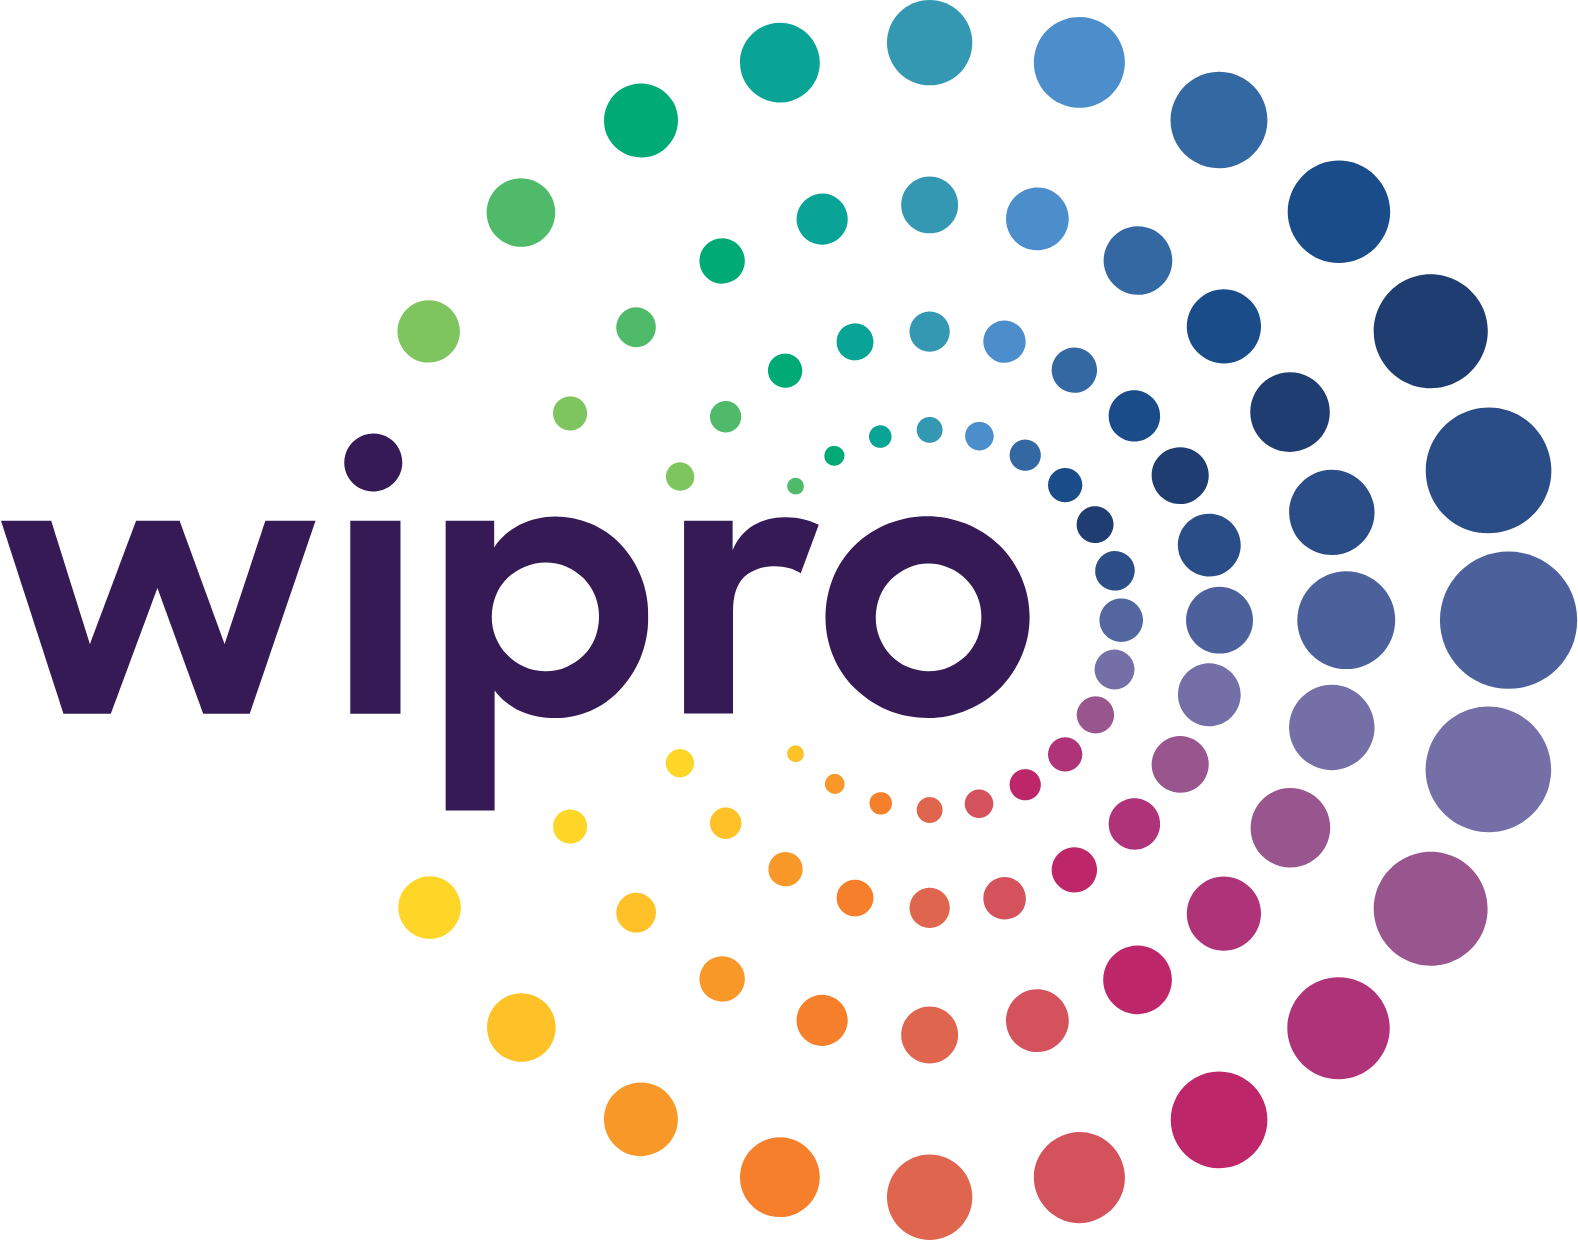 "Wipro Delivers Unpleasant News: Top Performers to Go Without Hike This Year"